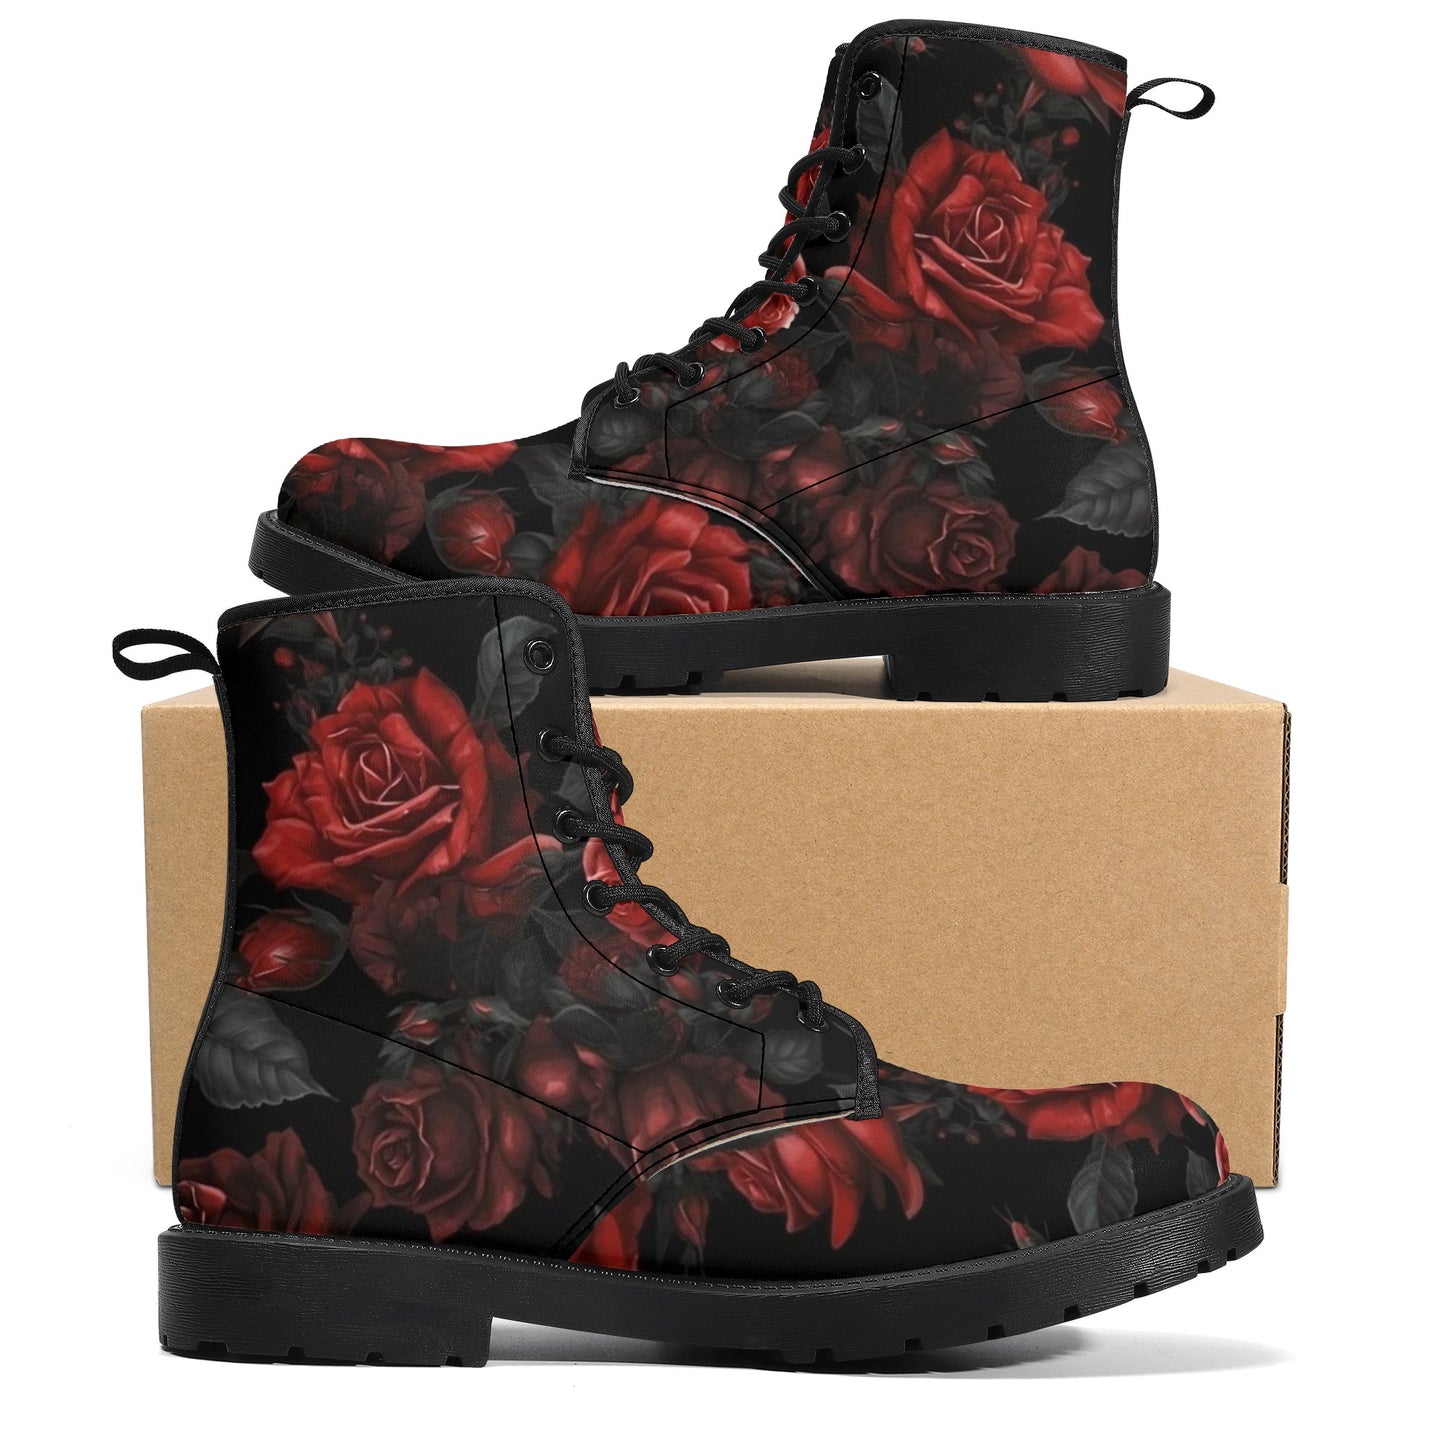 Red Roses Women Leather Boots, Floral Print Vegan Lace Up Shoes Hiking Black Ankle Combat Work Custom Army Waterproof Ladies Starcove Fashion